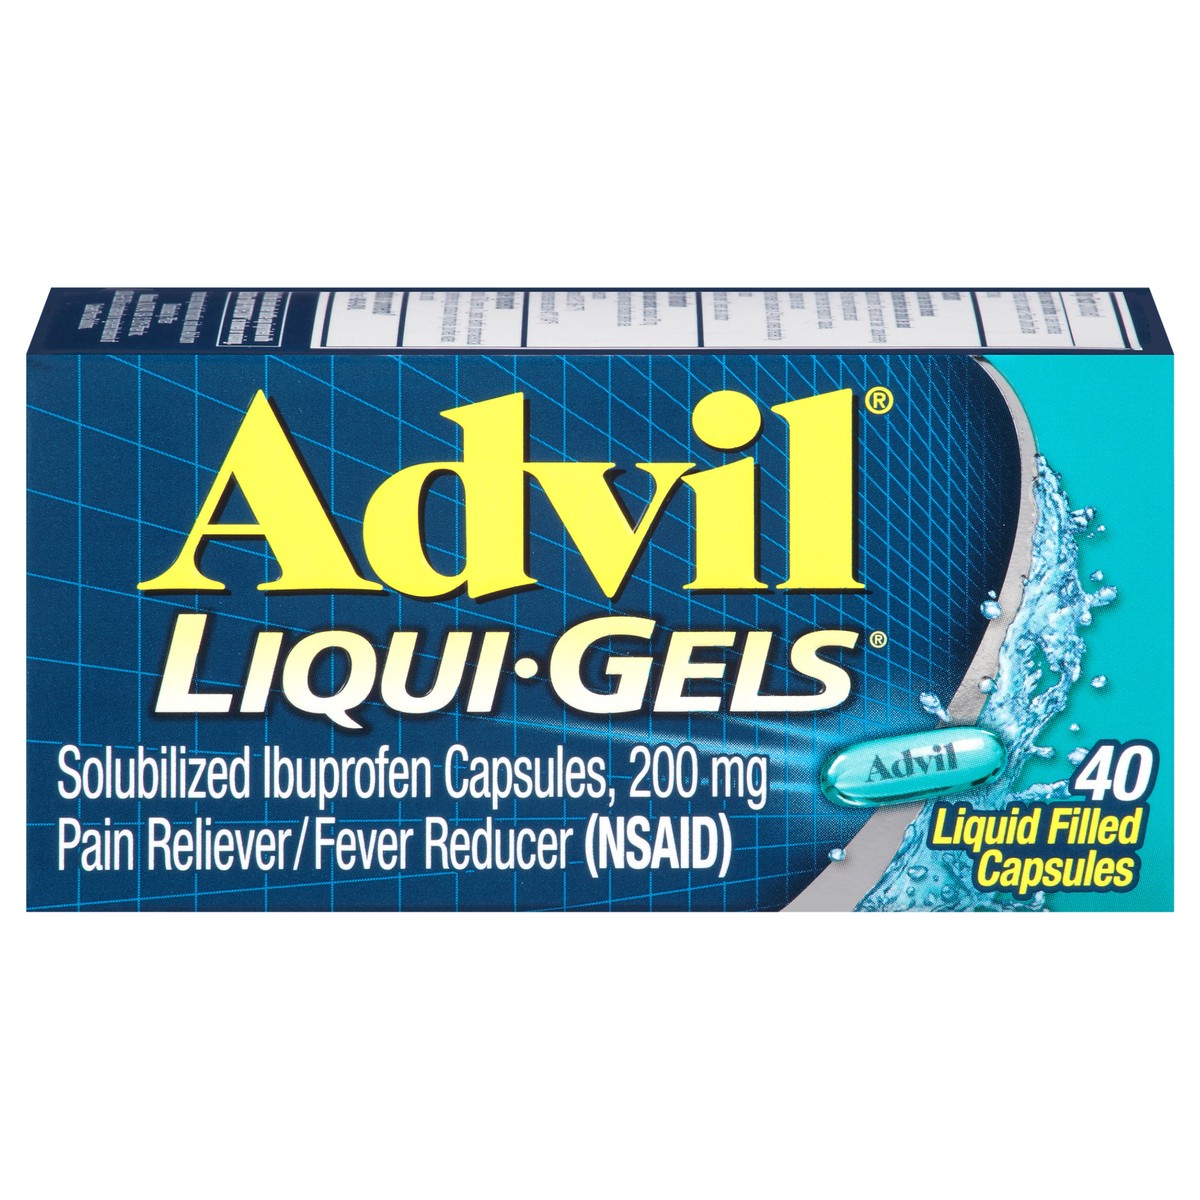 slide 1 of 9, Advil Liqui-Gels Pain Reliever and Fever Reducer, Ibuprofen 200mg for Pain Relief - 40 Liquid Filled Capsules, 40 ct